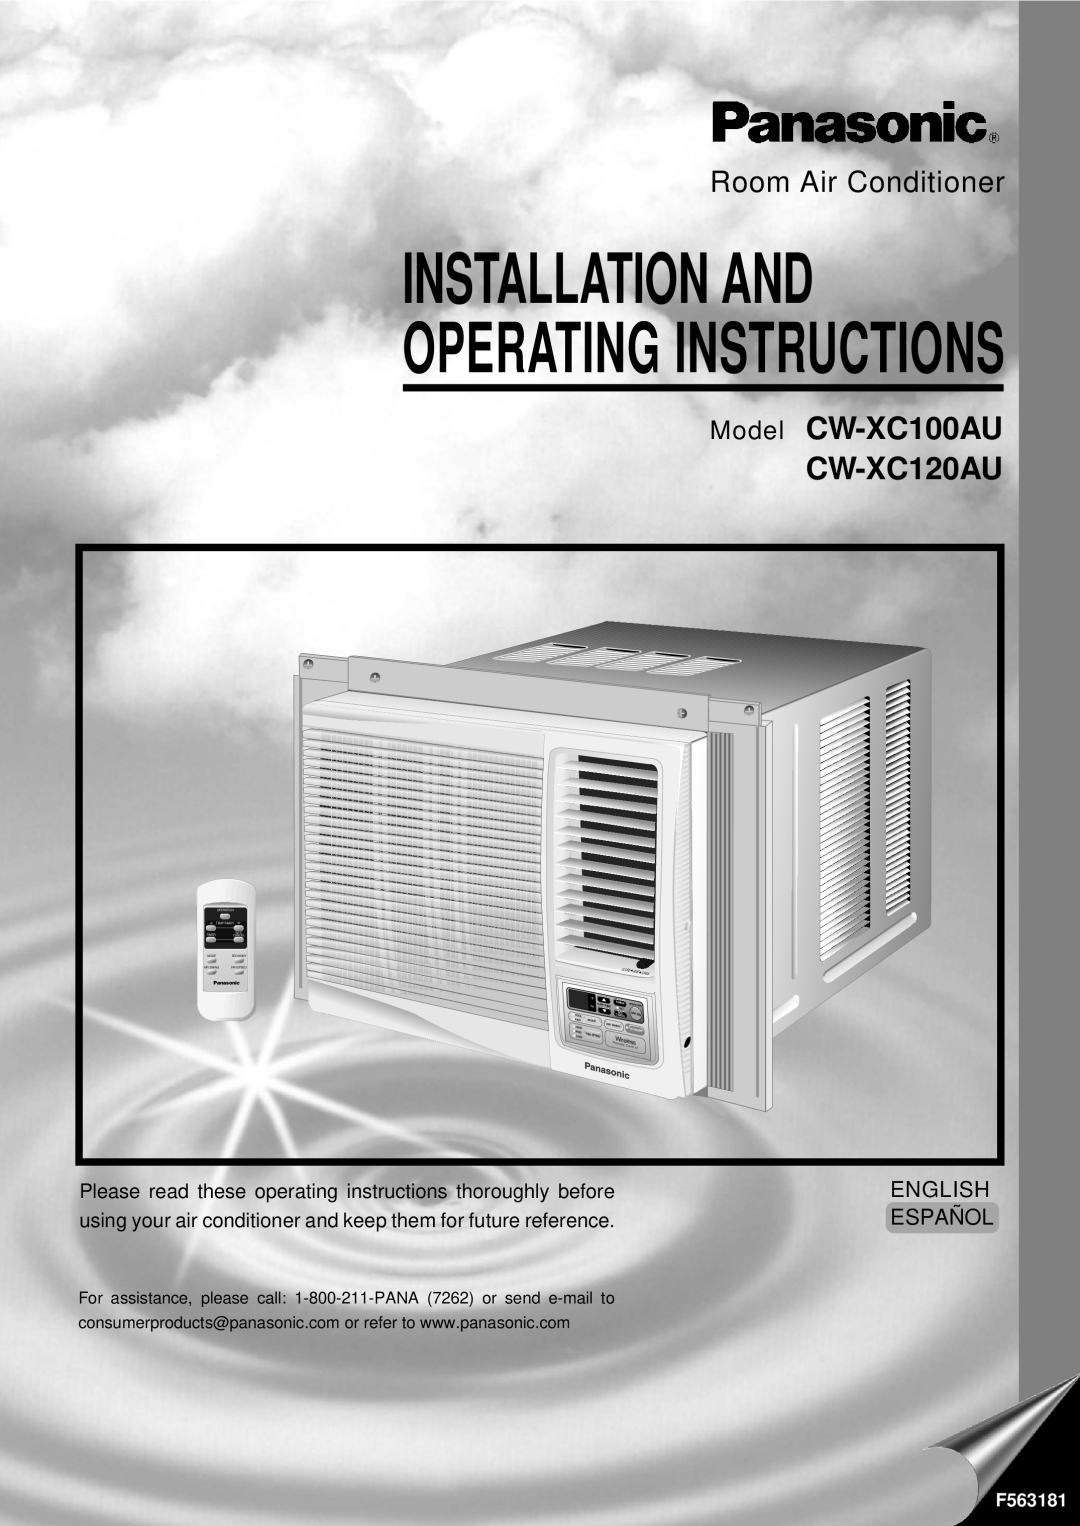 Panasonic CW-XC100AU manual Installation And, Operating Instructions, Room Air Conditioner, CW-XC120AU, Model, English 